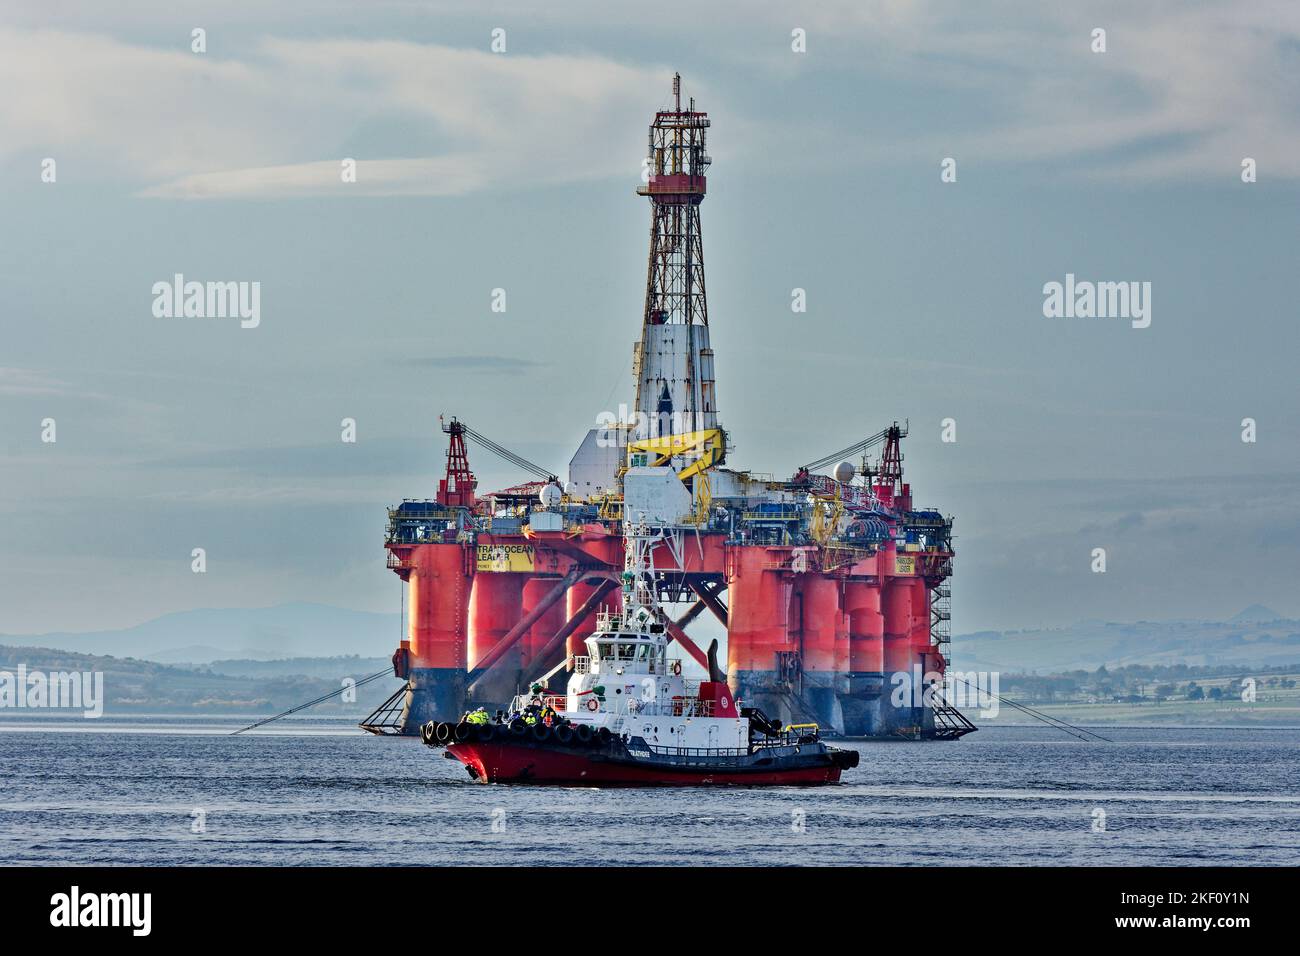 Cromarty Firth Scotland tug boat Strathdon sailing in front of the orange oil rig Transocean Leader Stock Photo